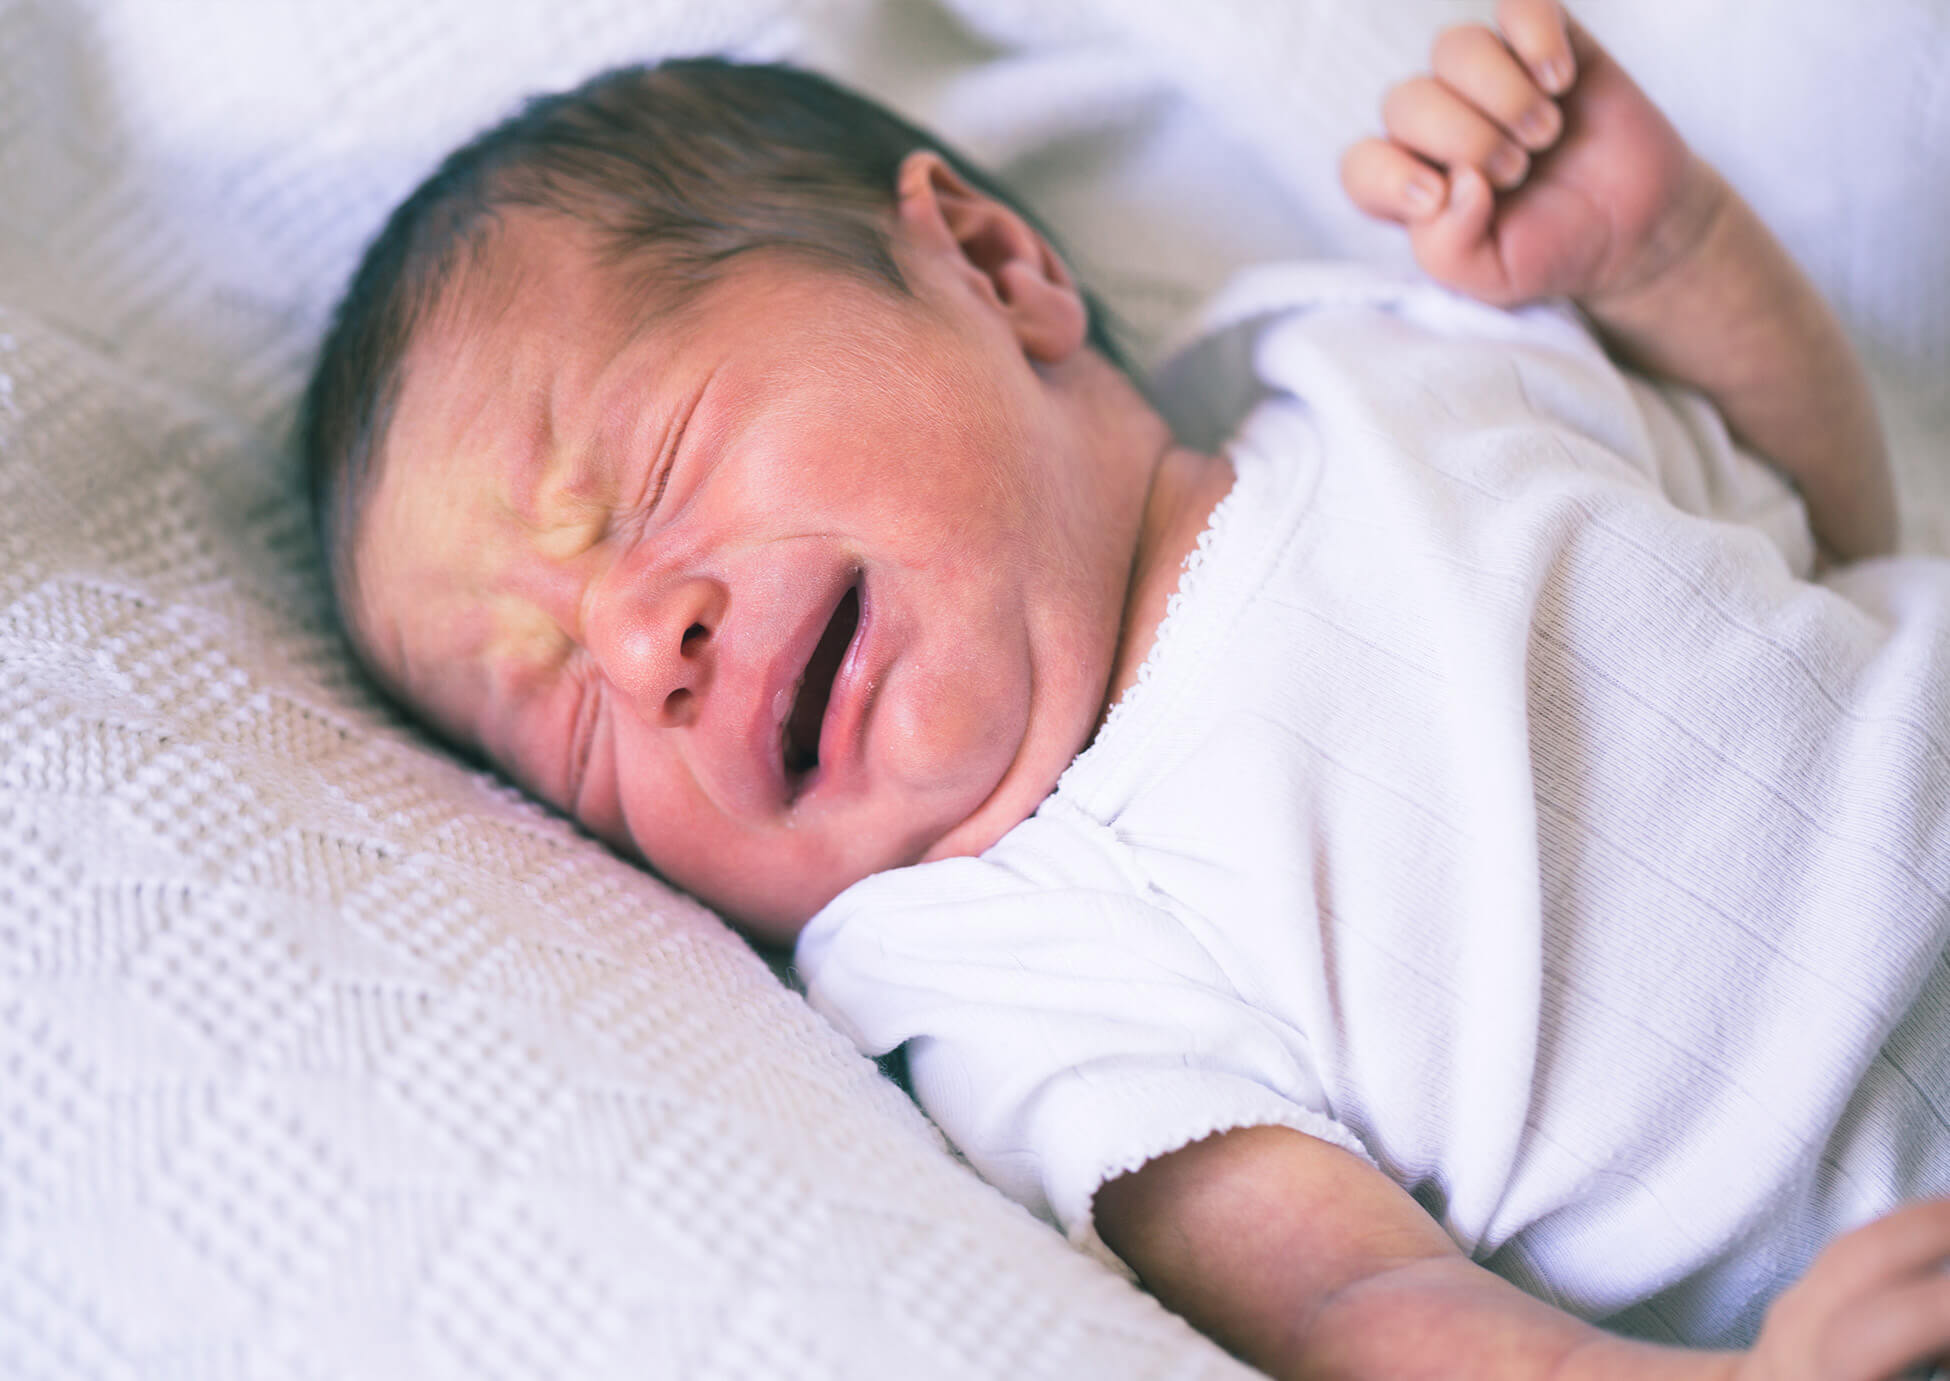 baby crying - shaken baby syndrome prevention